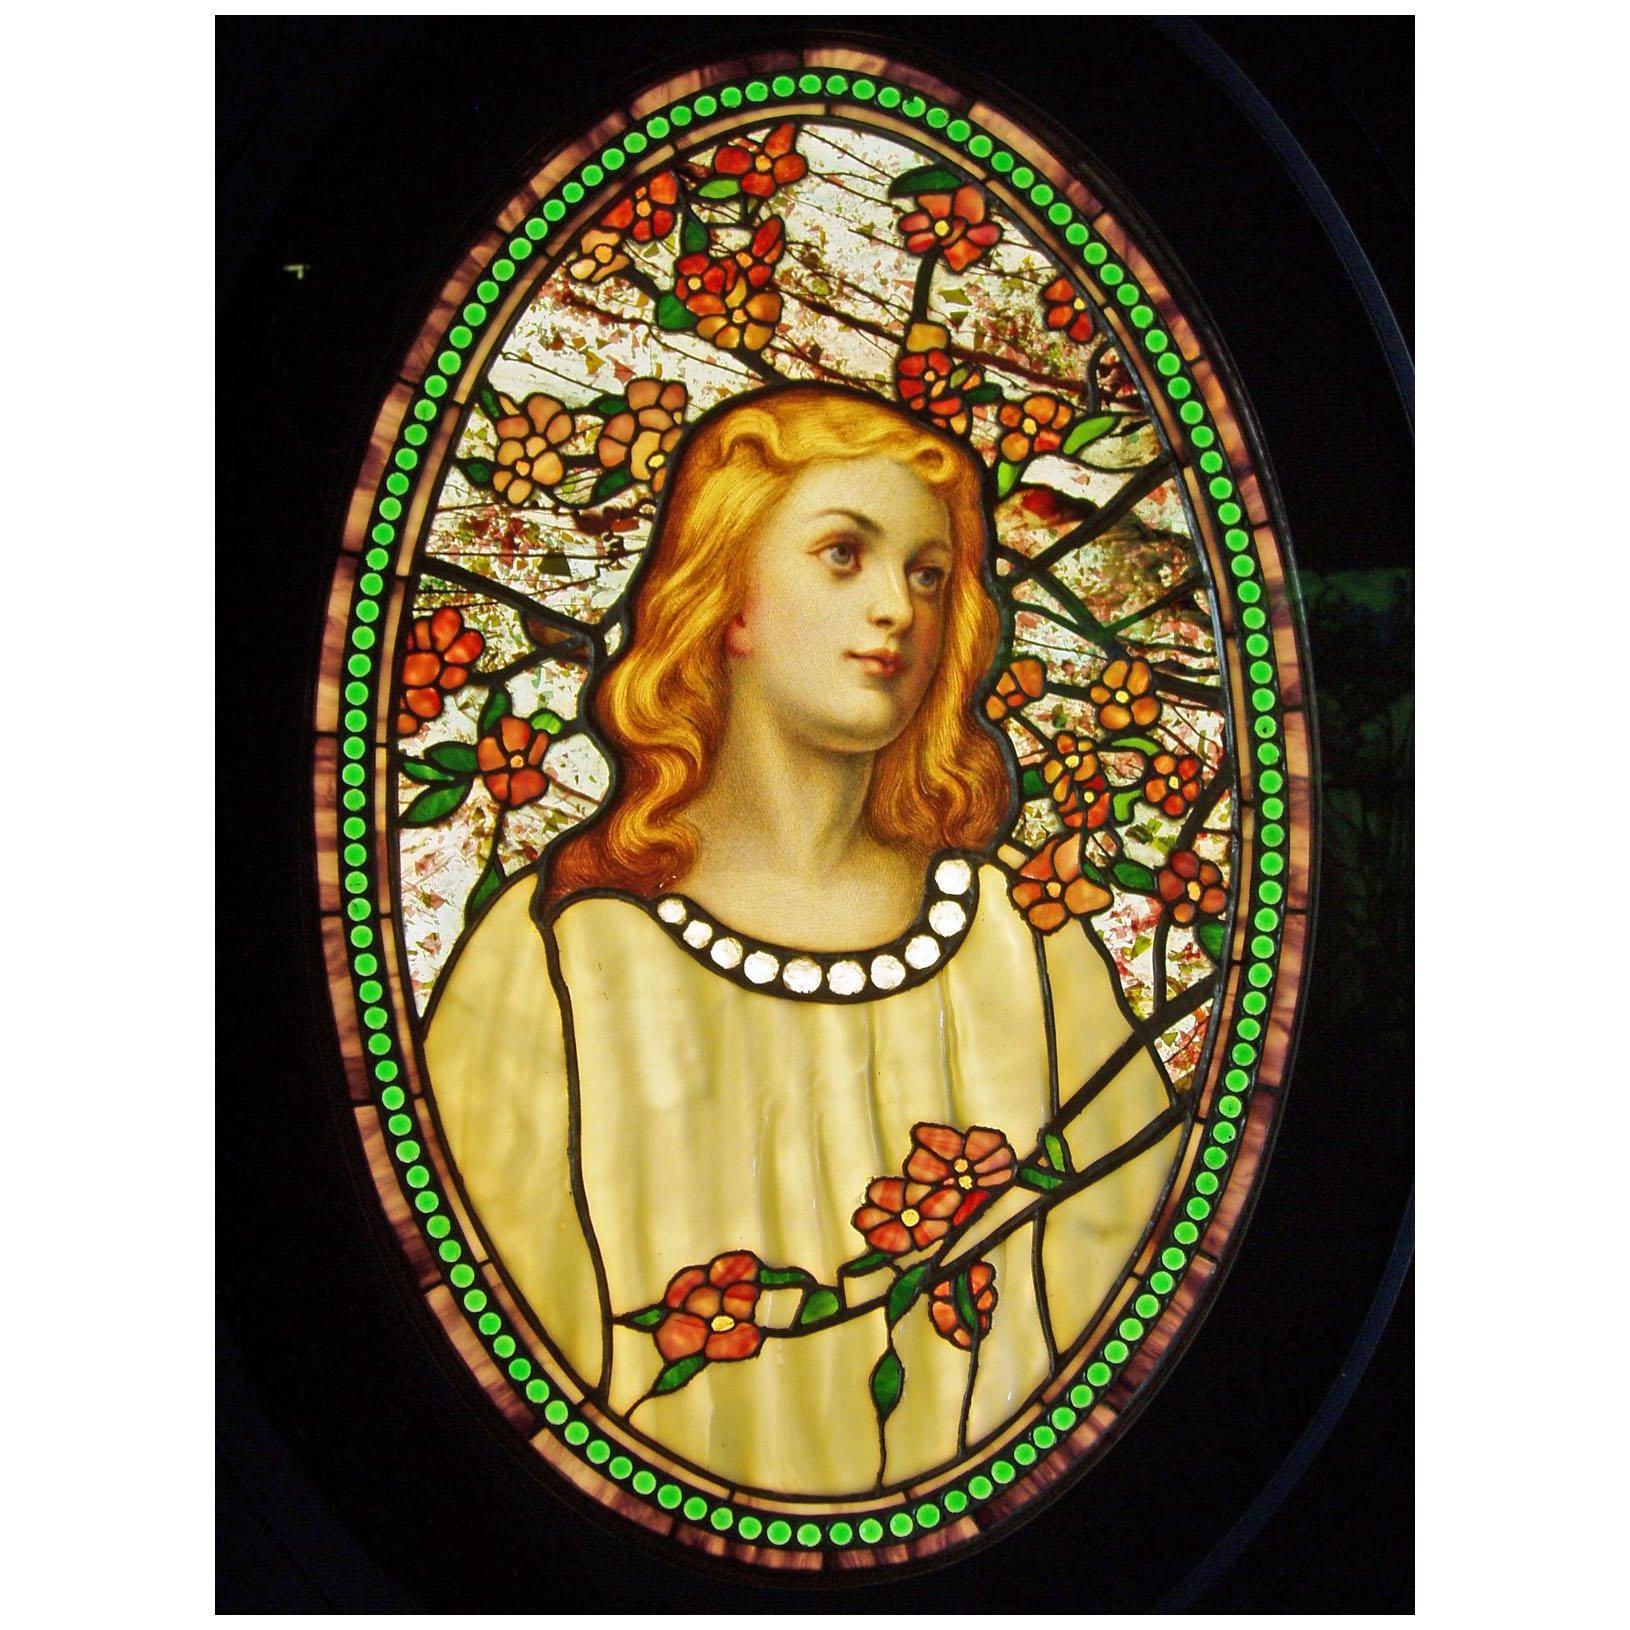 Louis Tiffany. Girl with Cherry Blossoms. 1890. Driehaus Gallery of Stained Glass Chicago